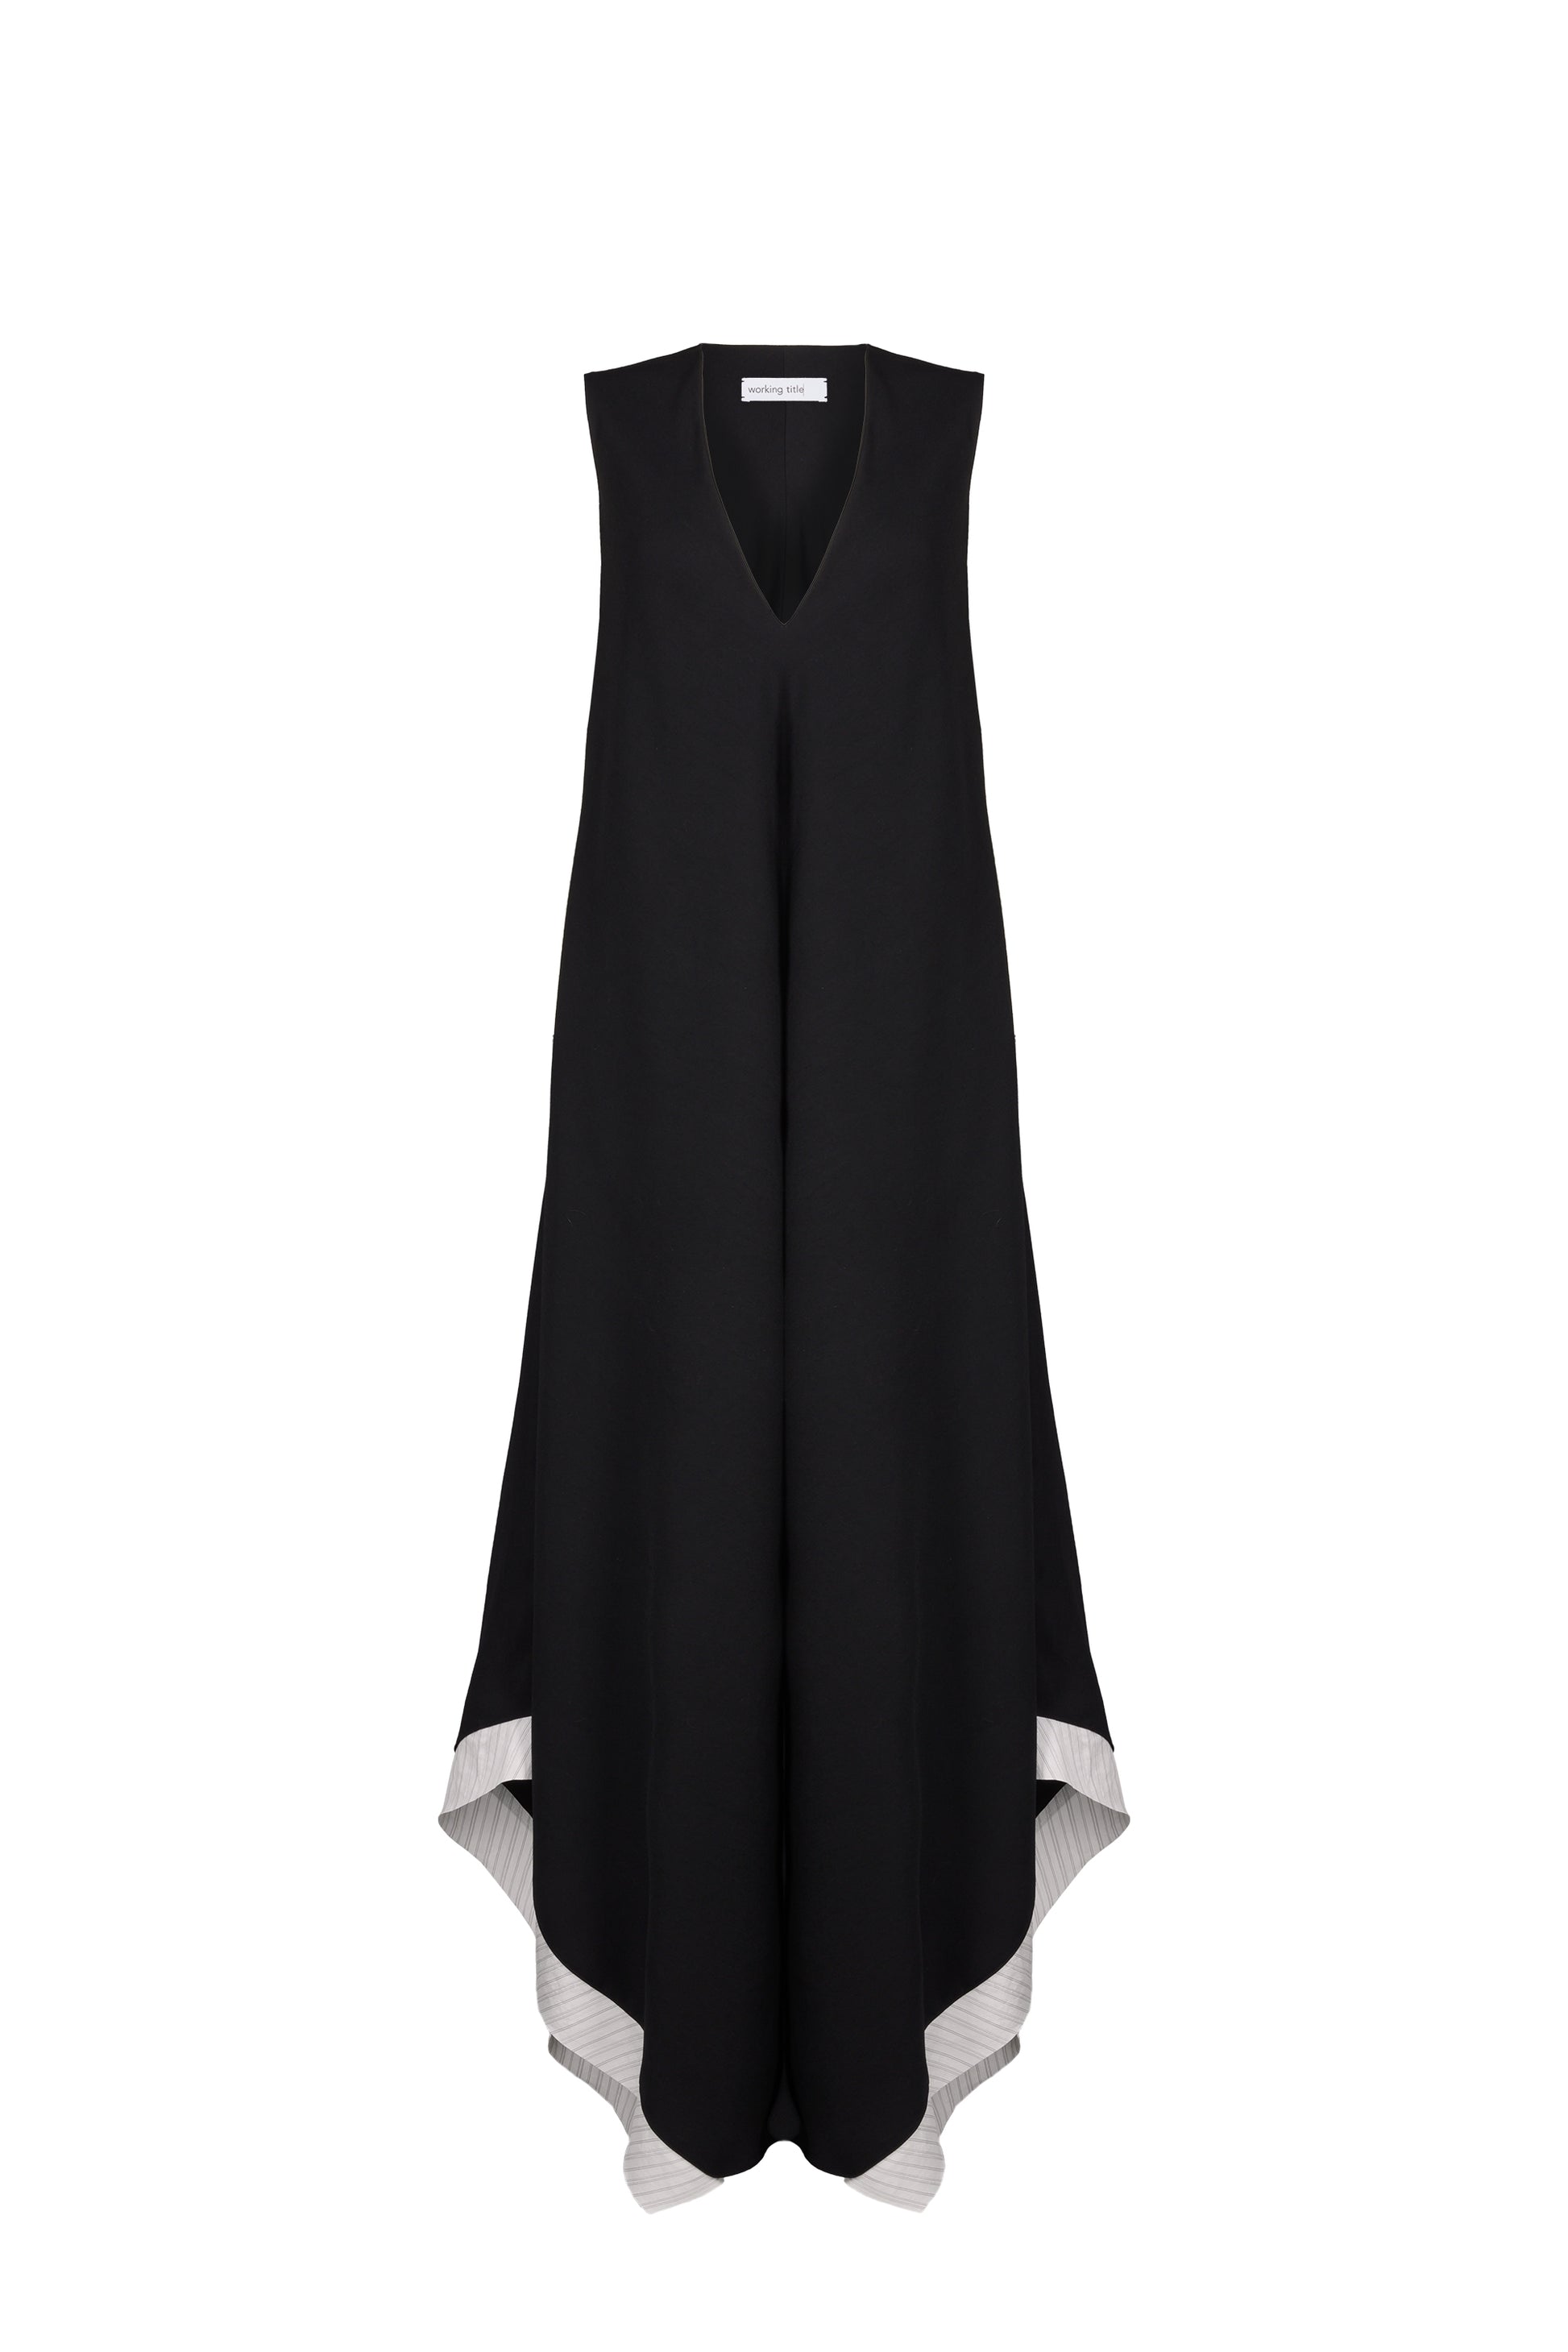 Elegant black sleeveless dress with a bias-cut hem and contrasting white stripe detailing along the edges, featuring a V-neckline and a flowing silhouette for a sophisticated look.